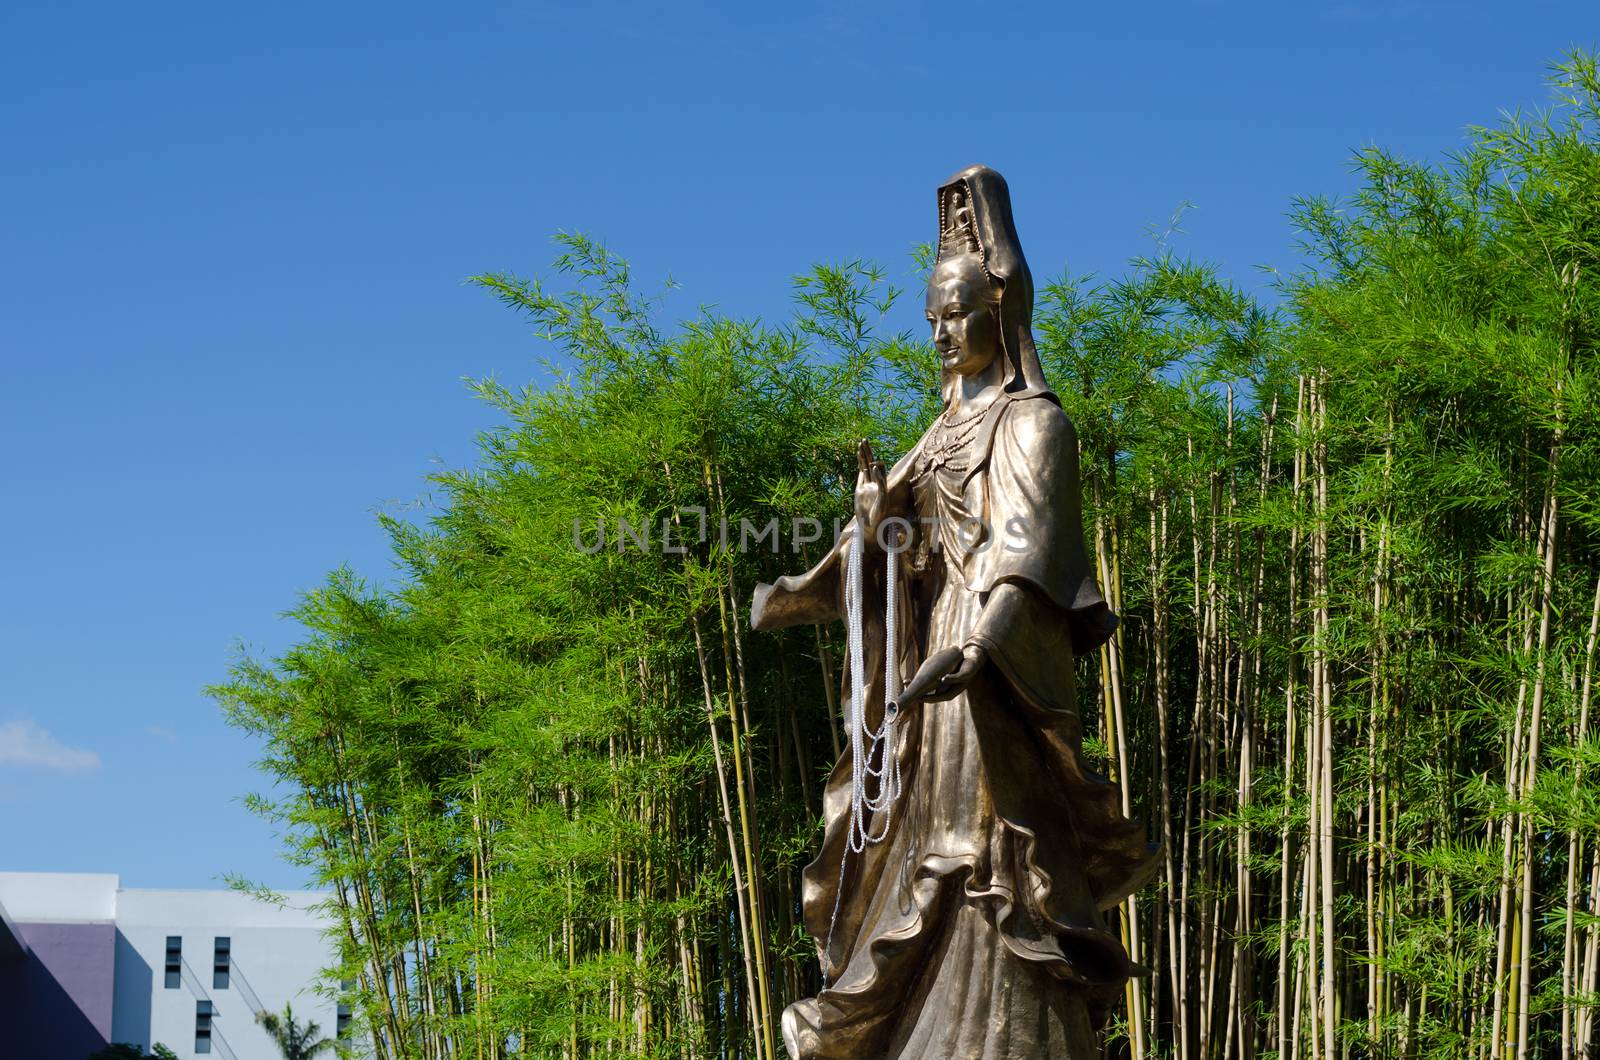 Guan Yin, Goddess of Mercy, with Bamboo Garden in background by siraanamwong